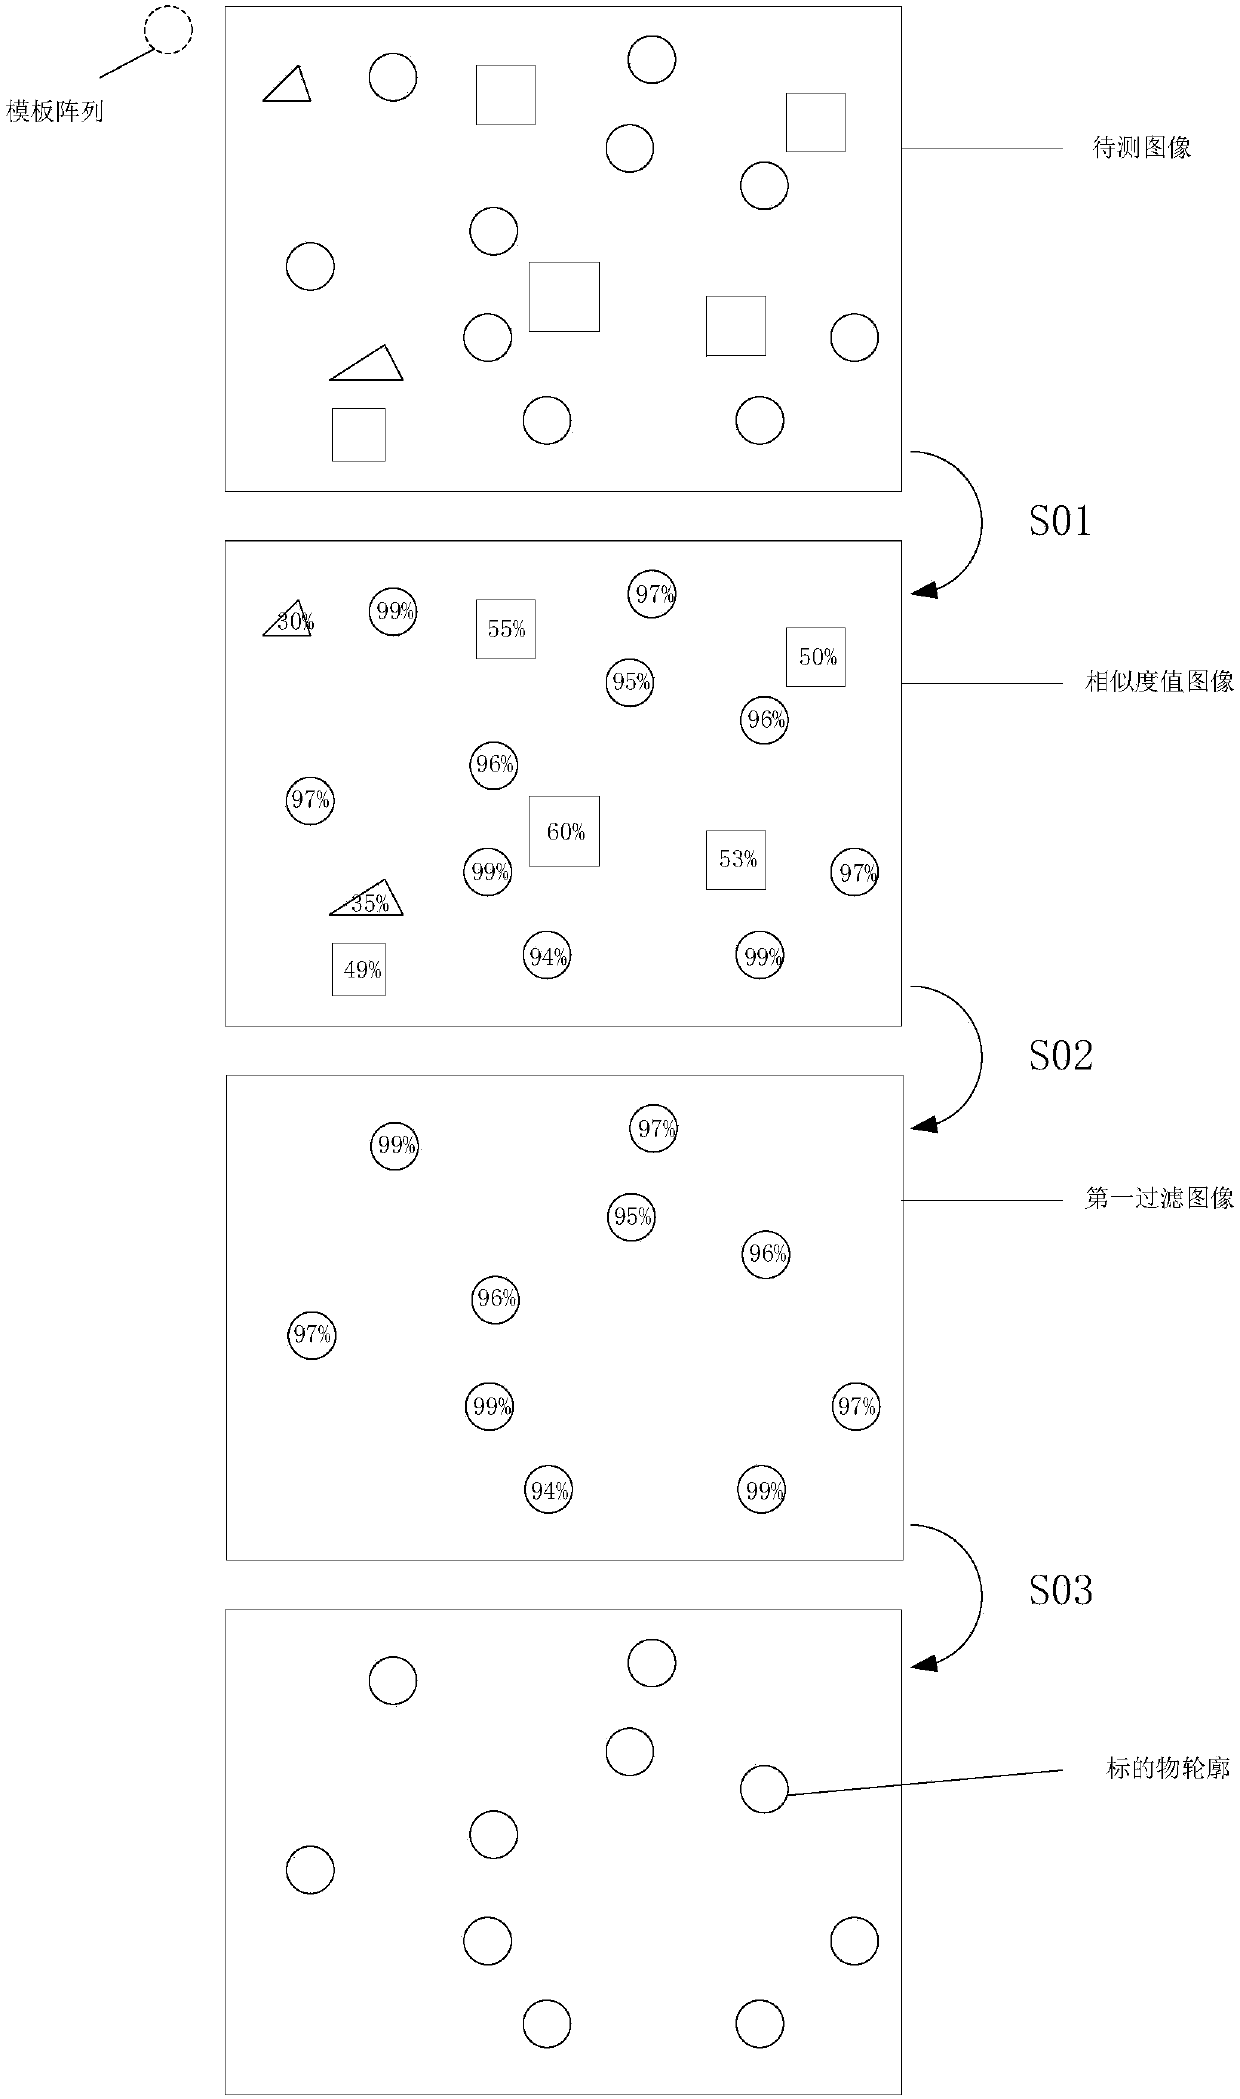 Image recognition method, system, automatic focusing control method and system